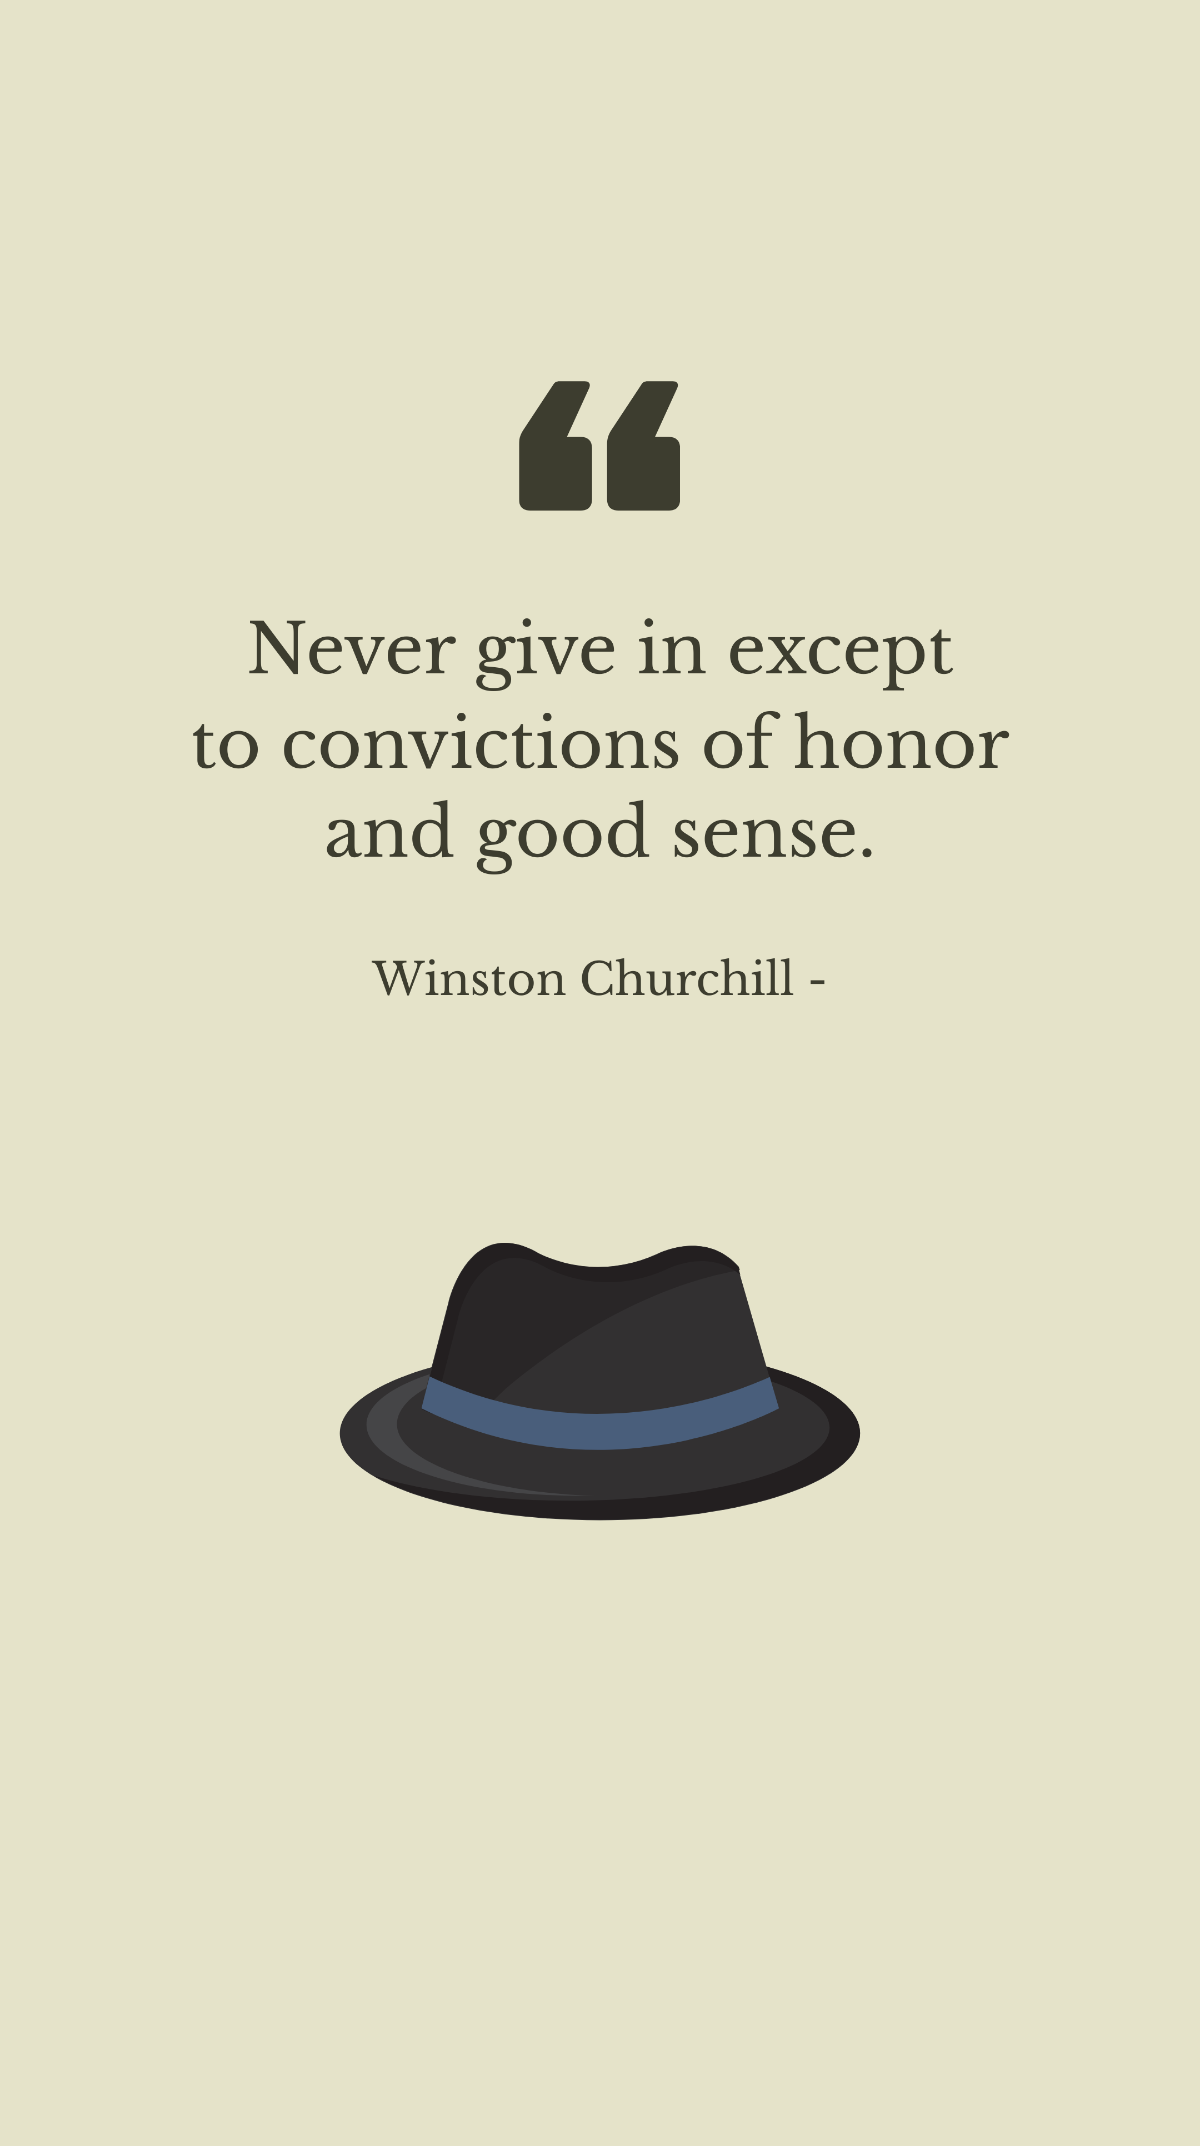 Winston Churchill - Never give in except to convictions of honor and good sense.